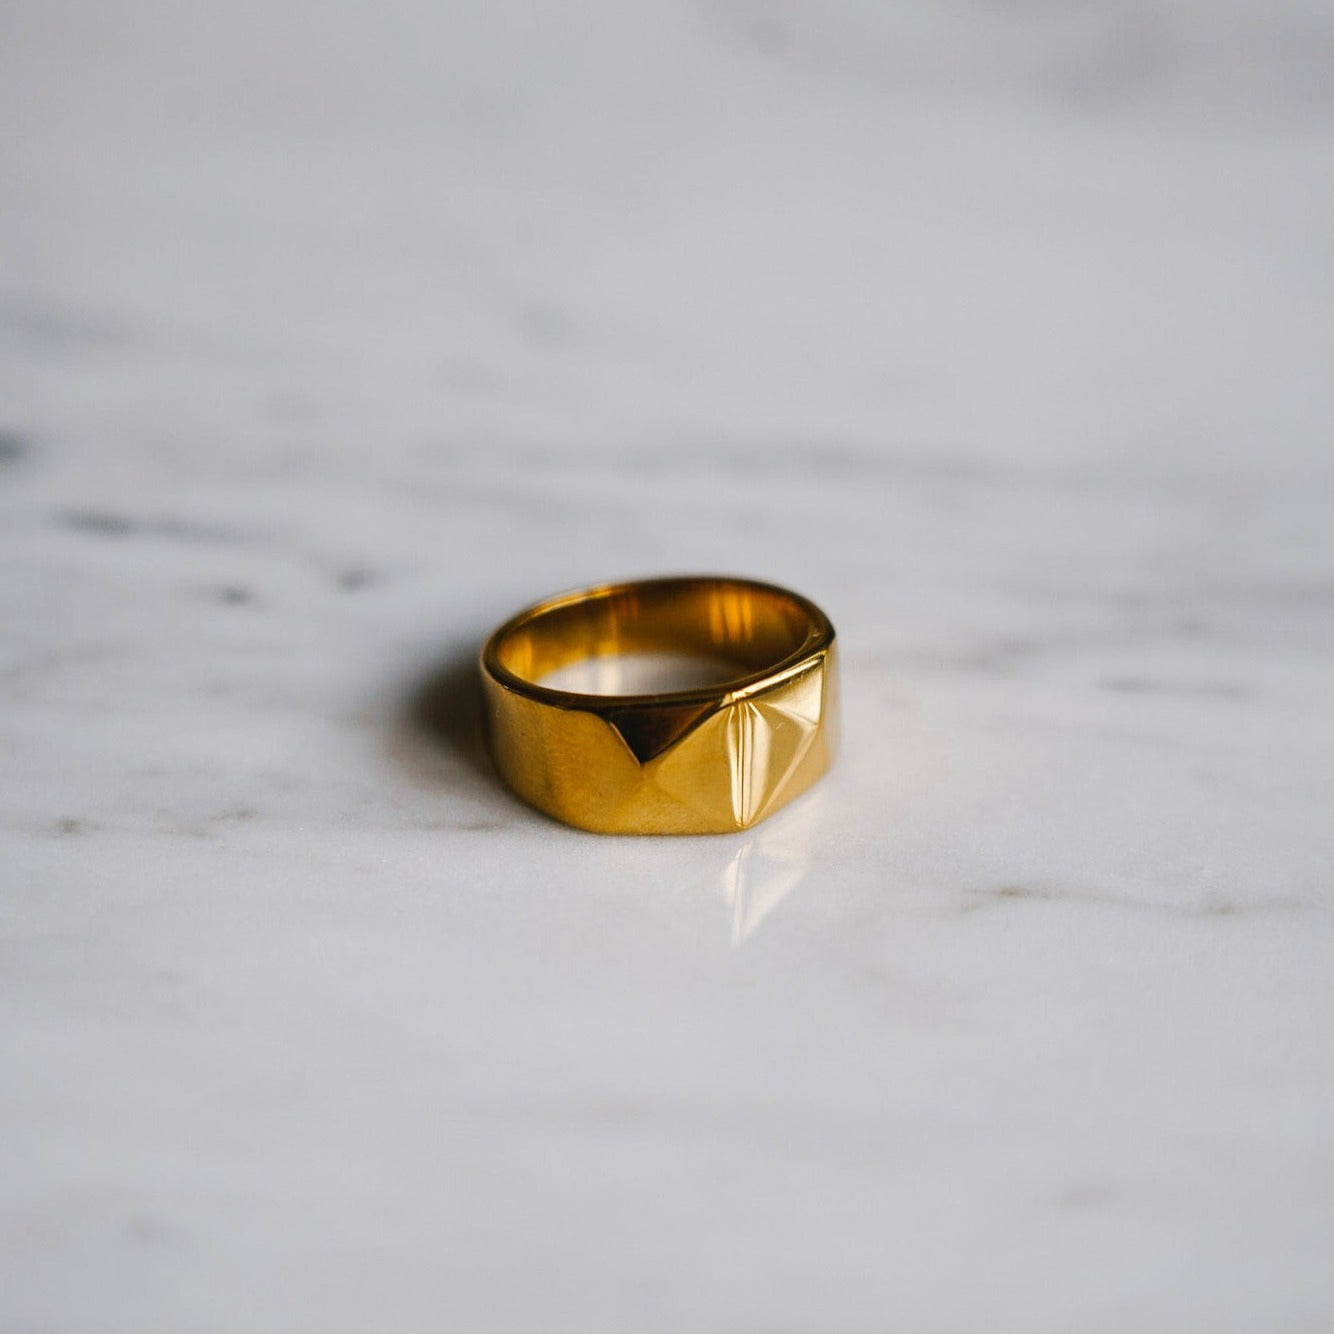 Kant Signature ring - Gold-toned